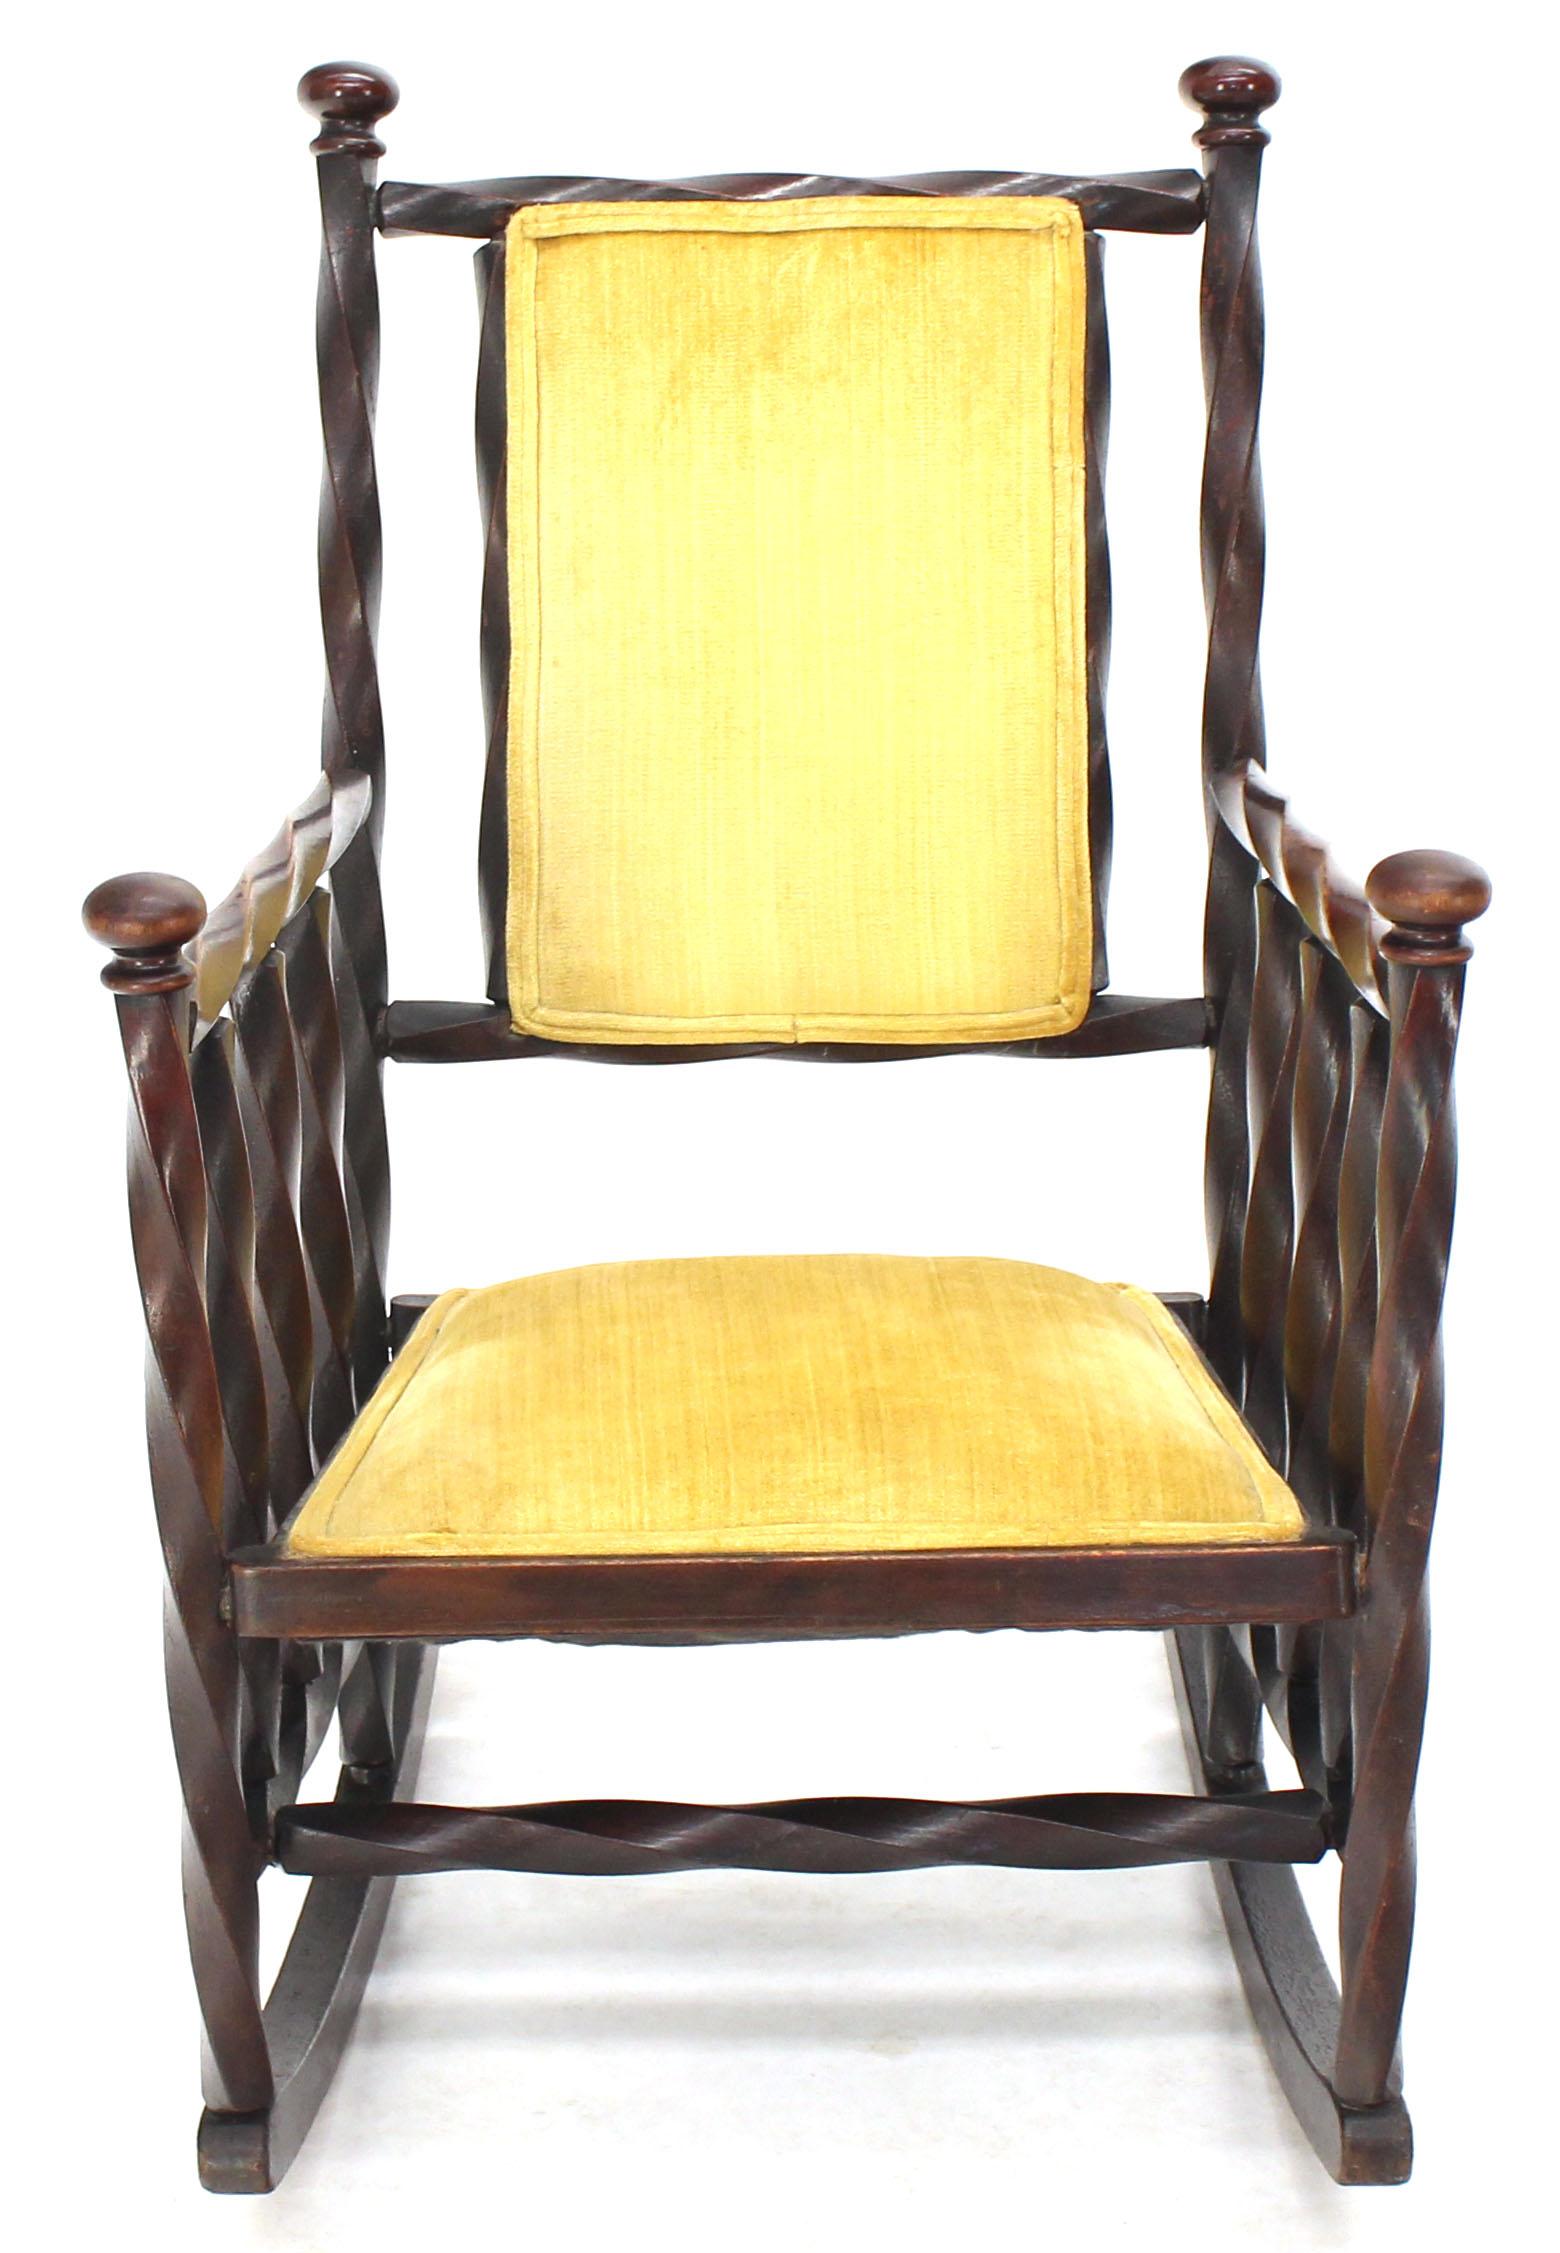 Rare and unusual Arts & Crafts deco rocking chairs made of 